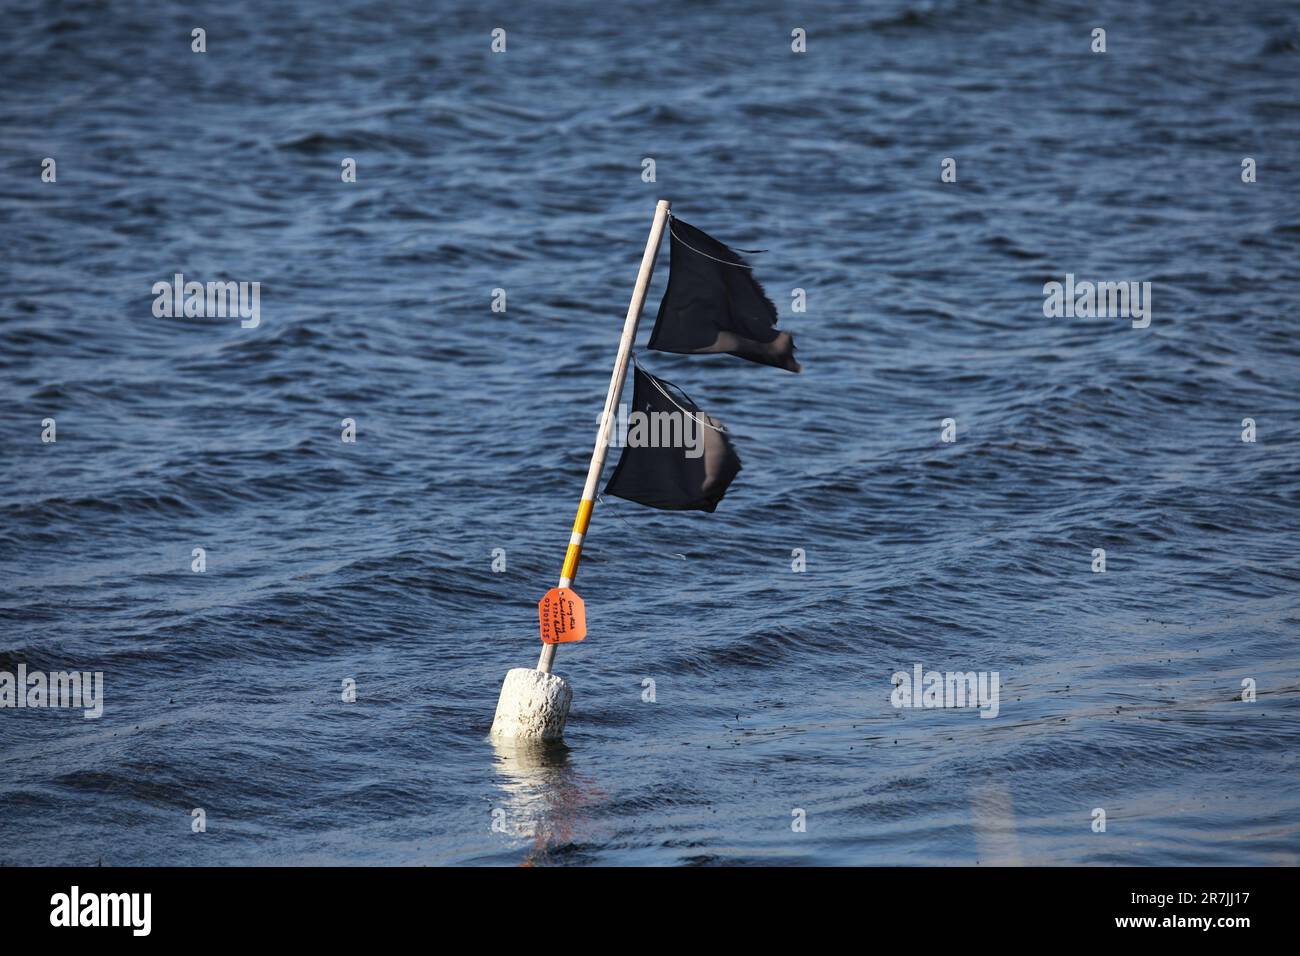 A buoy with two torn black flags floating in the calm waters of a